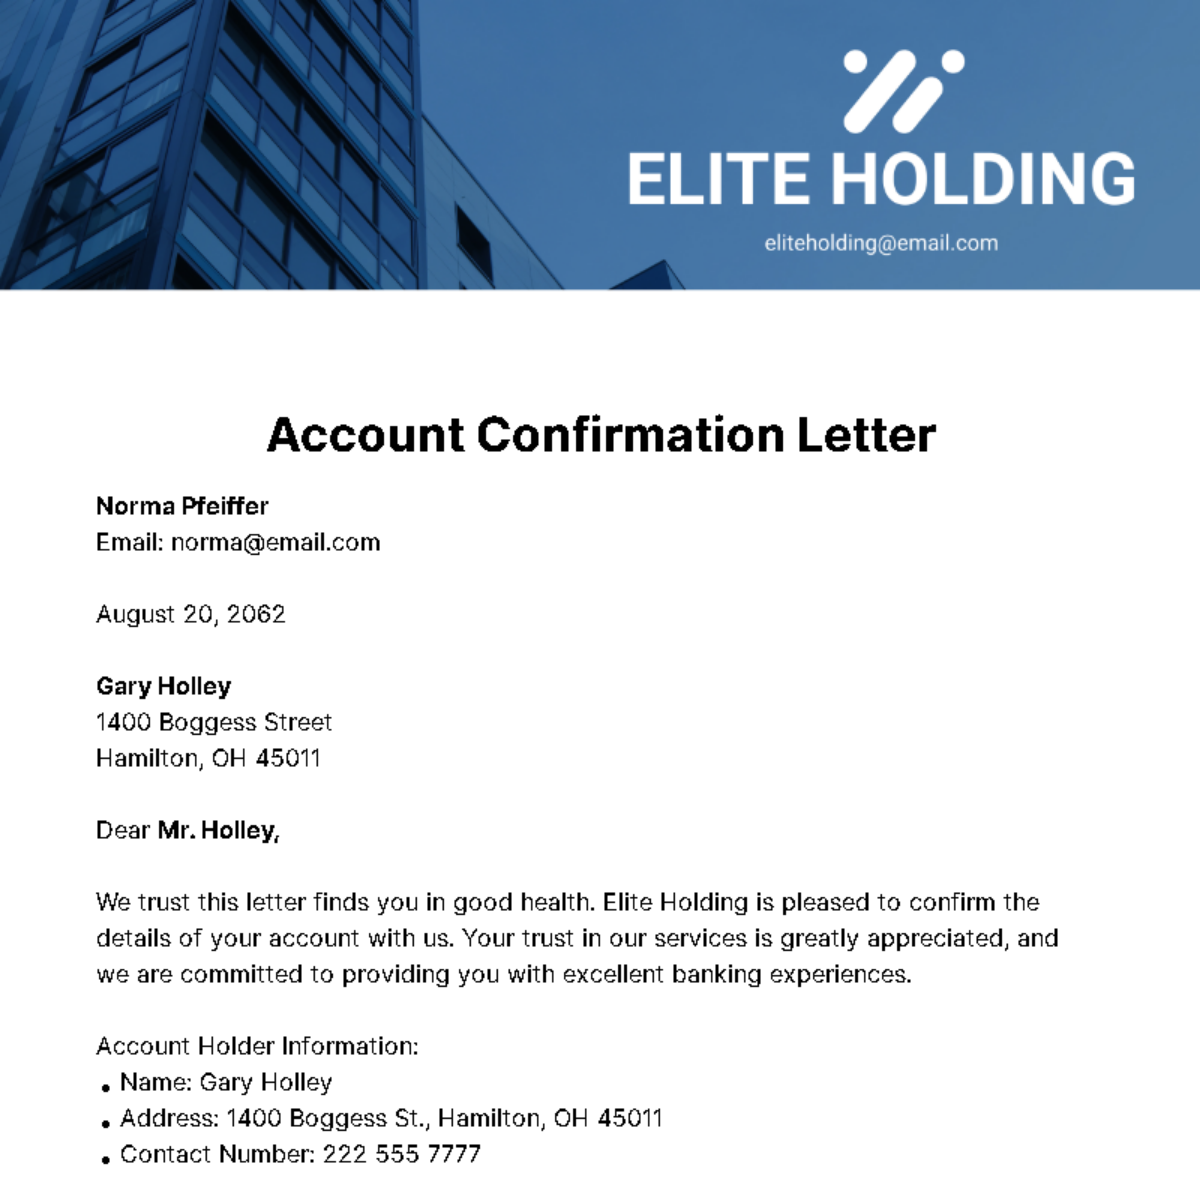 Account Confirmation Letter Template